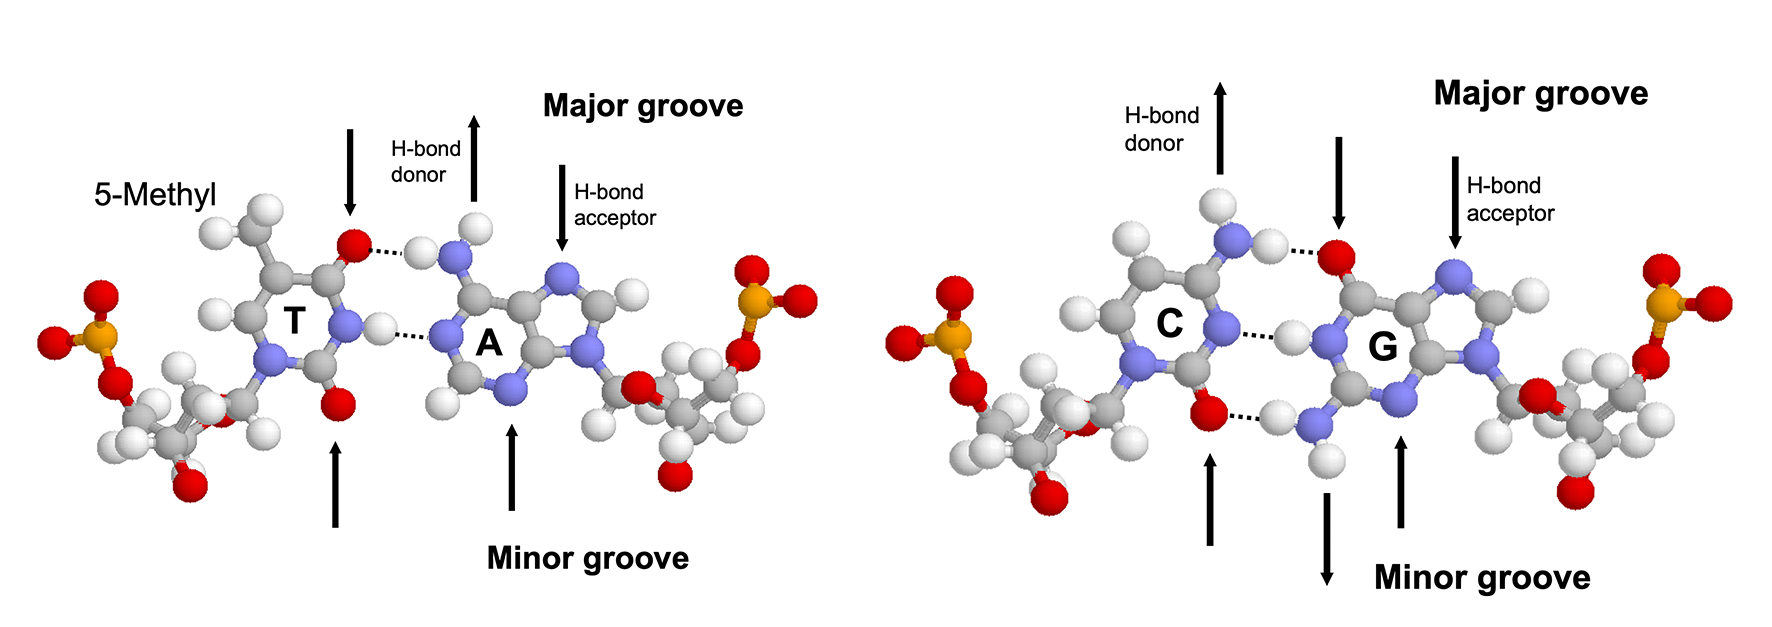 Hydrogen bonding patterns in the major and minor groove of AT and CG base pairs.